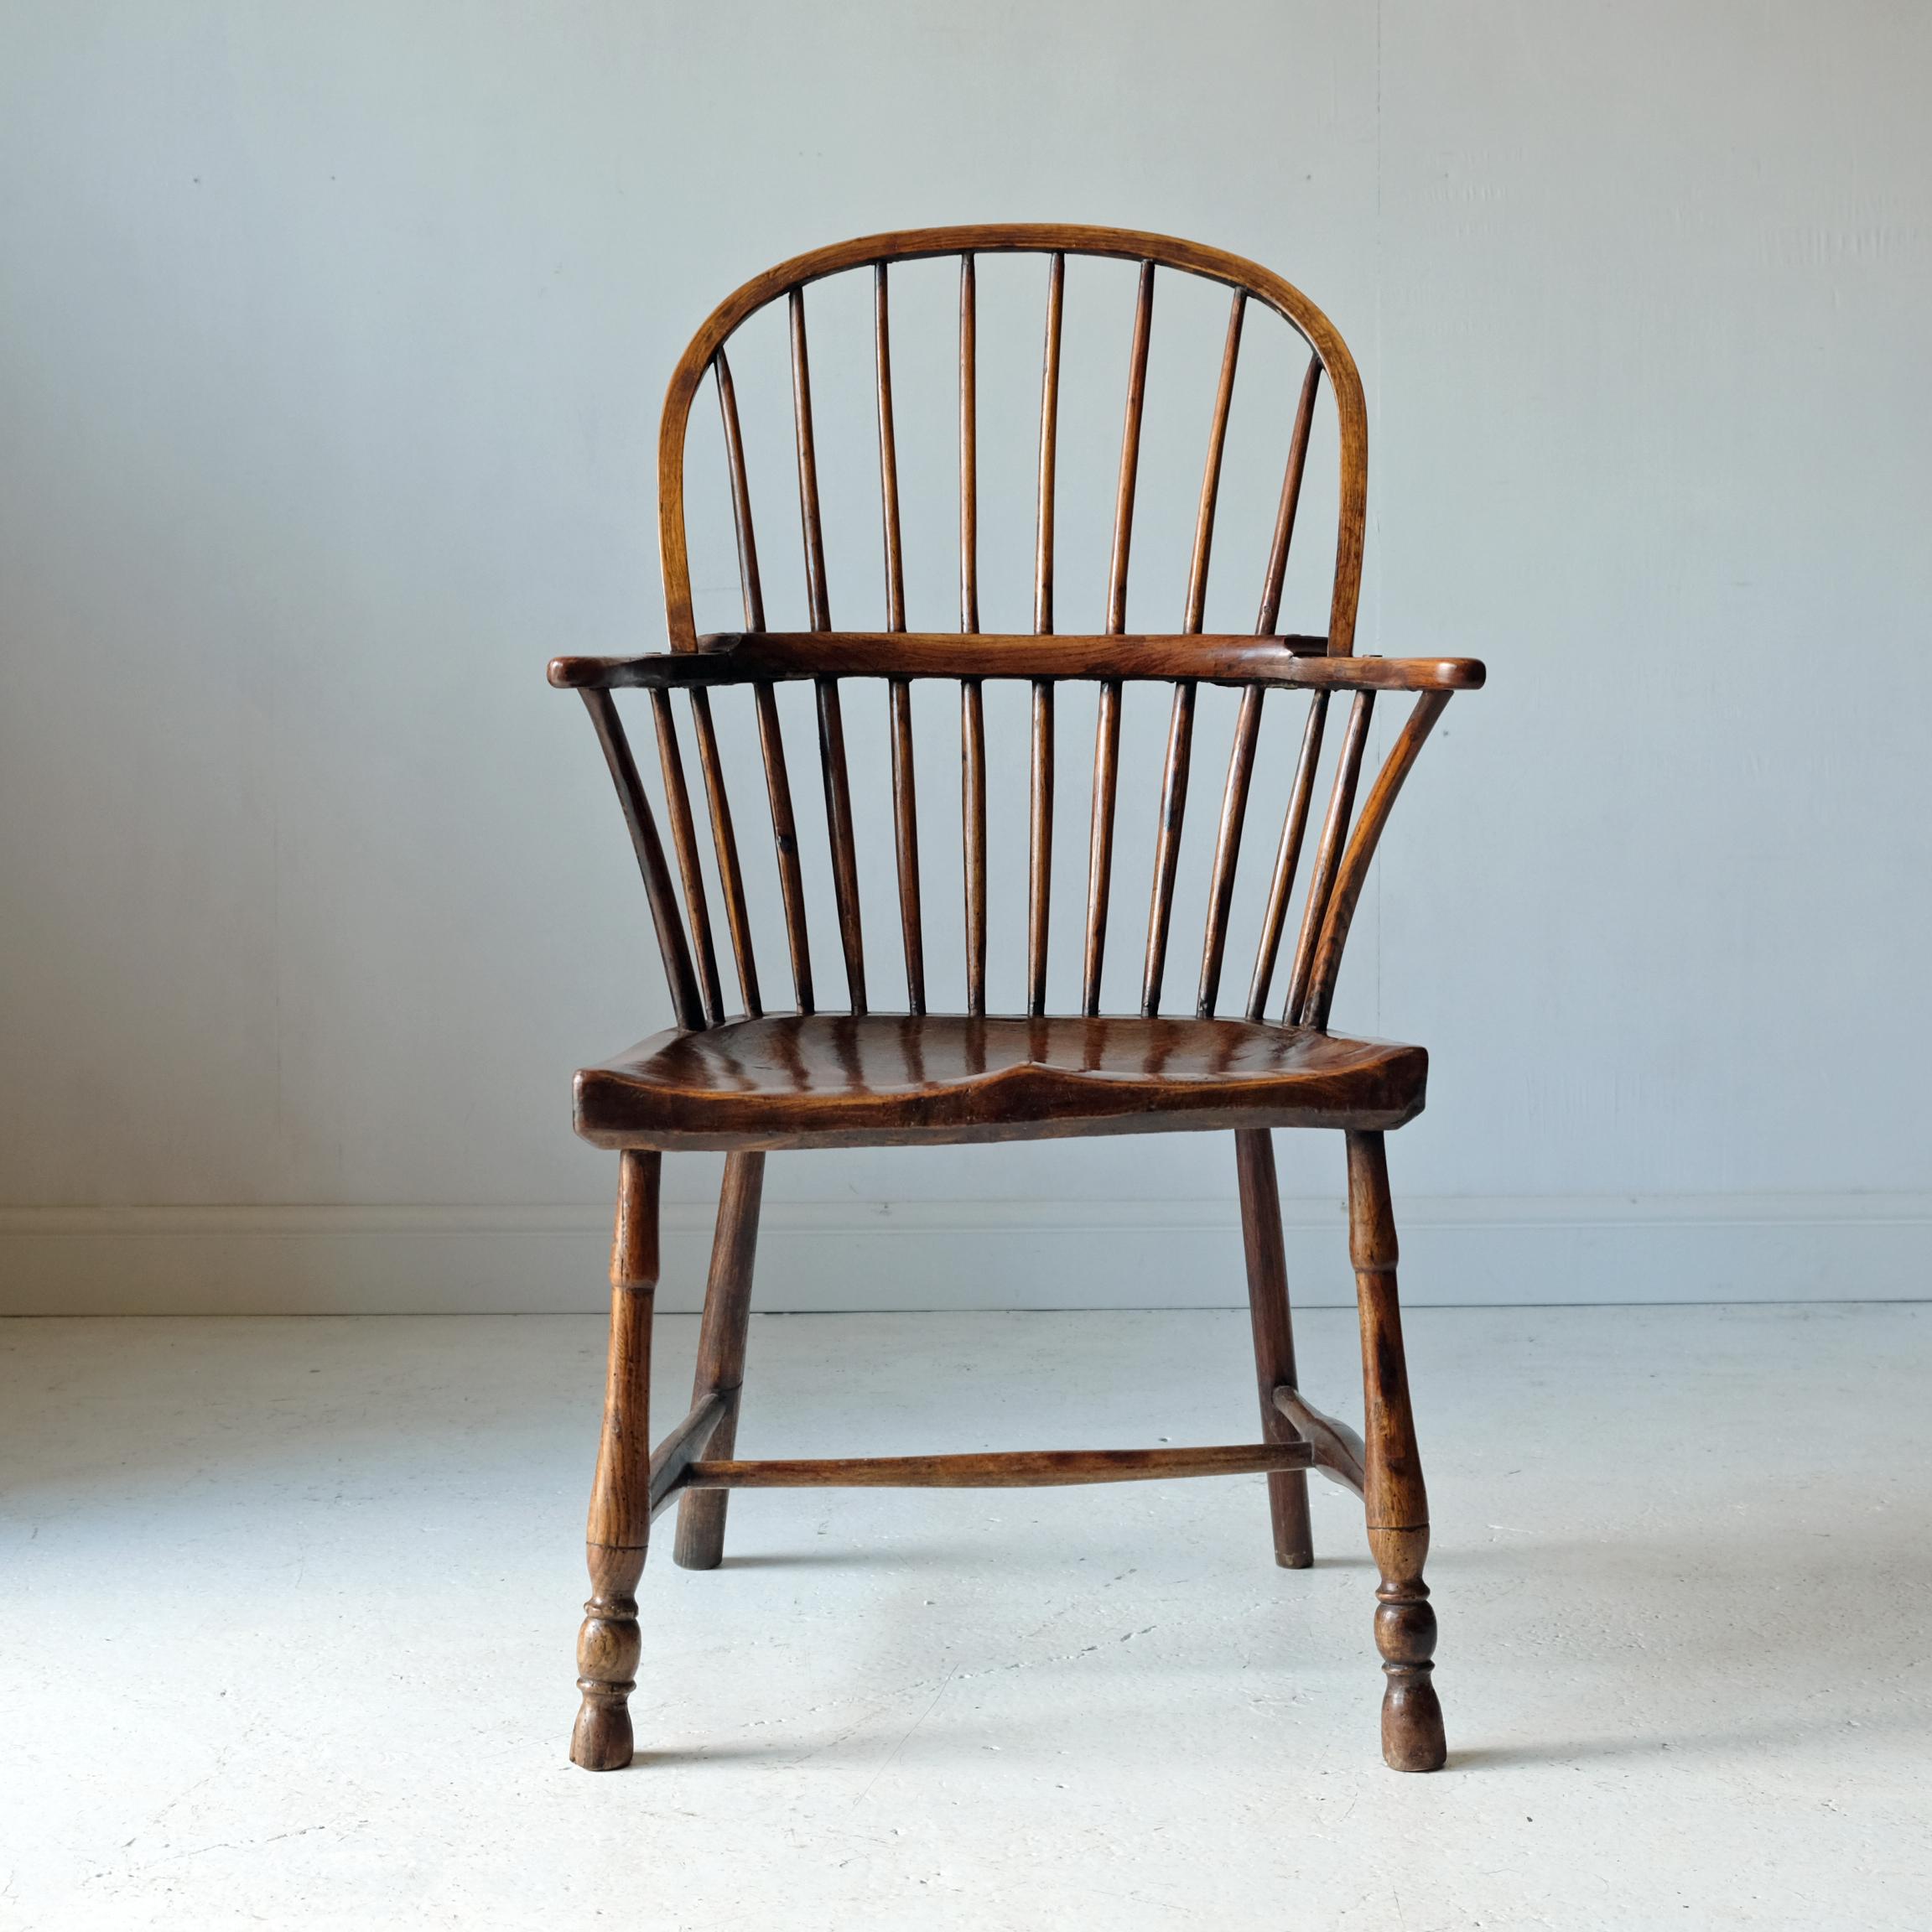 Hand-Crafted Simple Burr Elm Country Windsor Chair, Early 19th Century, Rustic, English